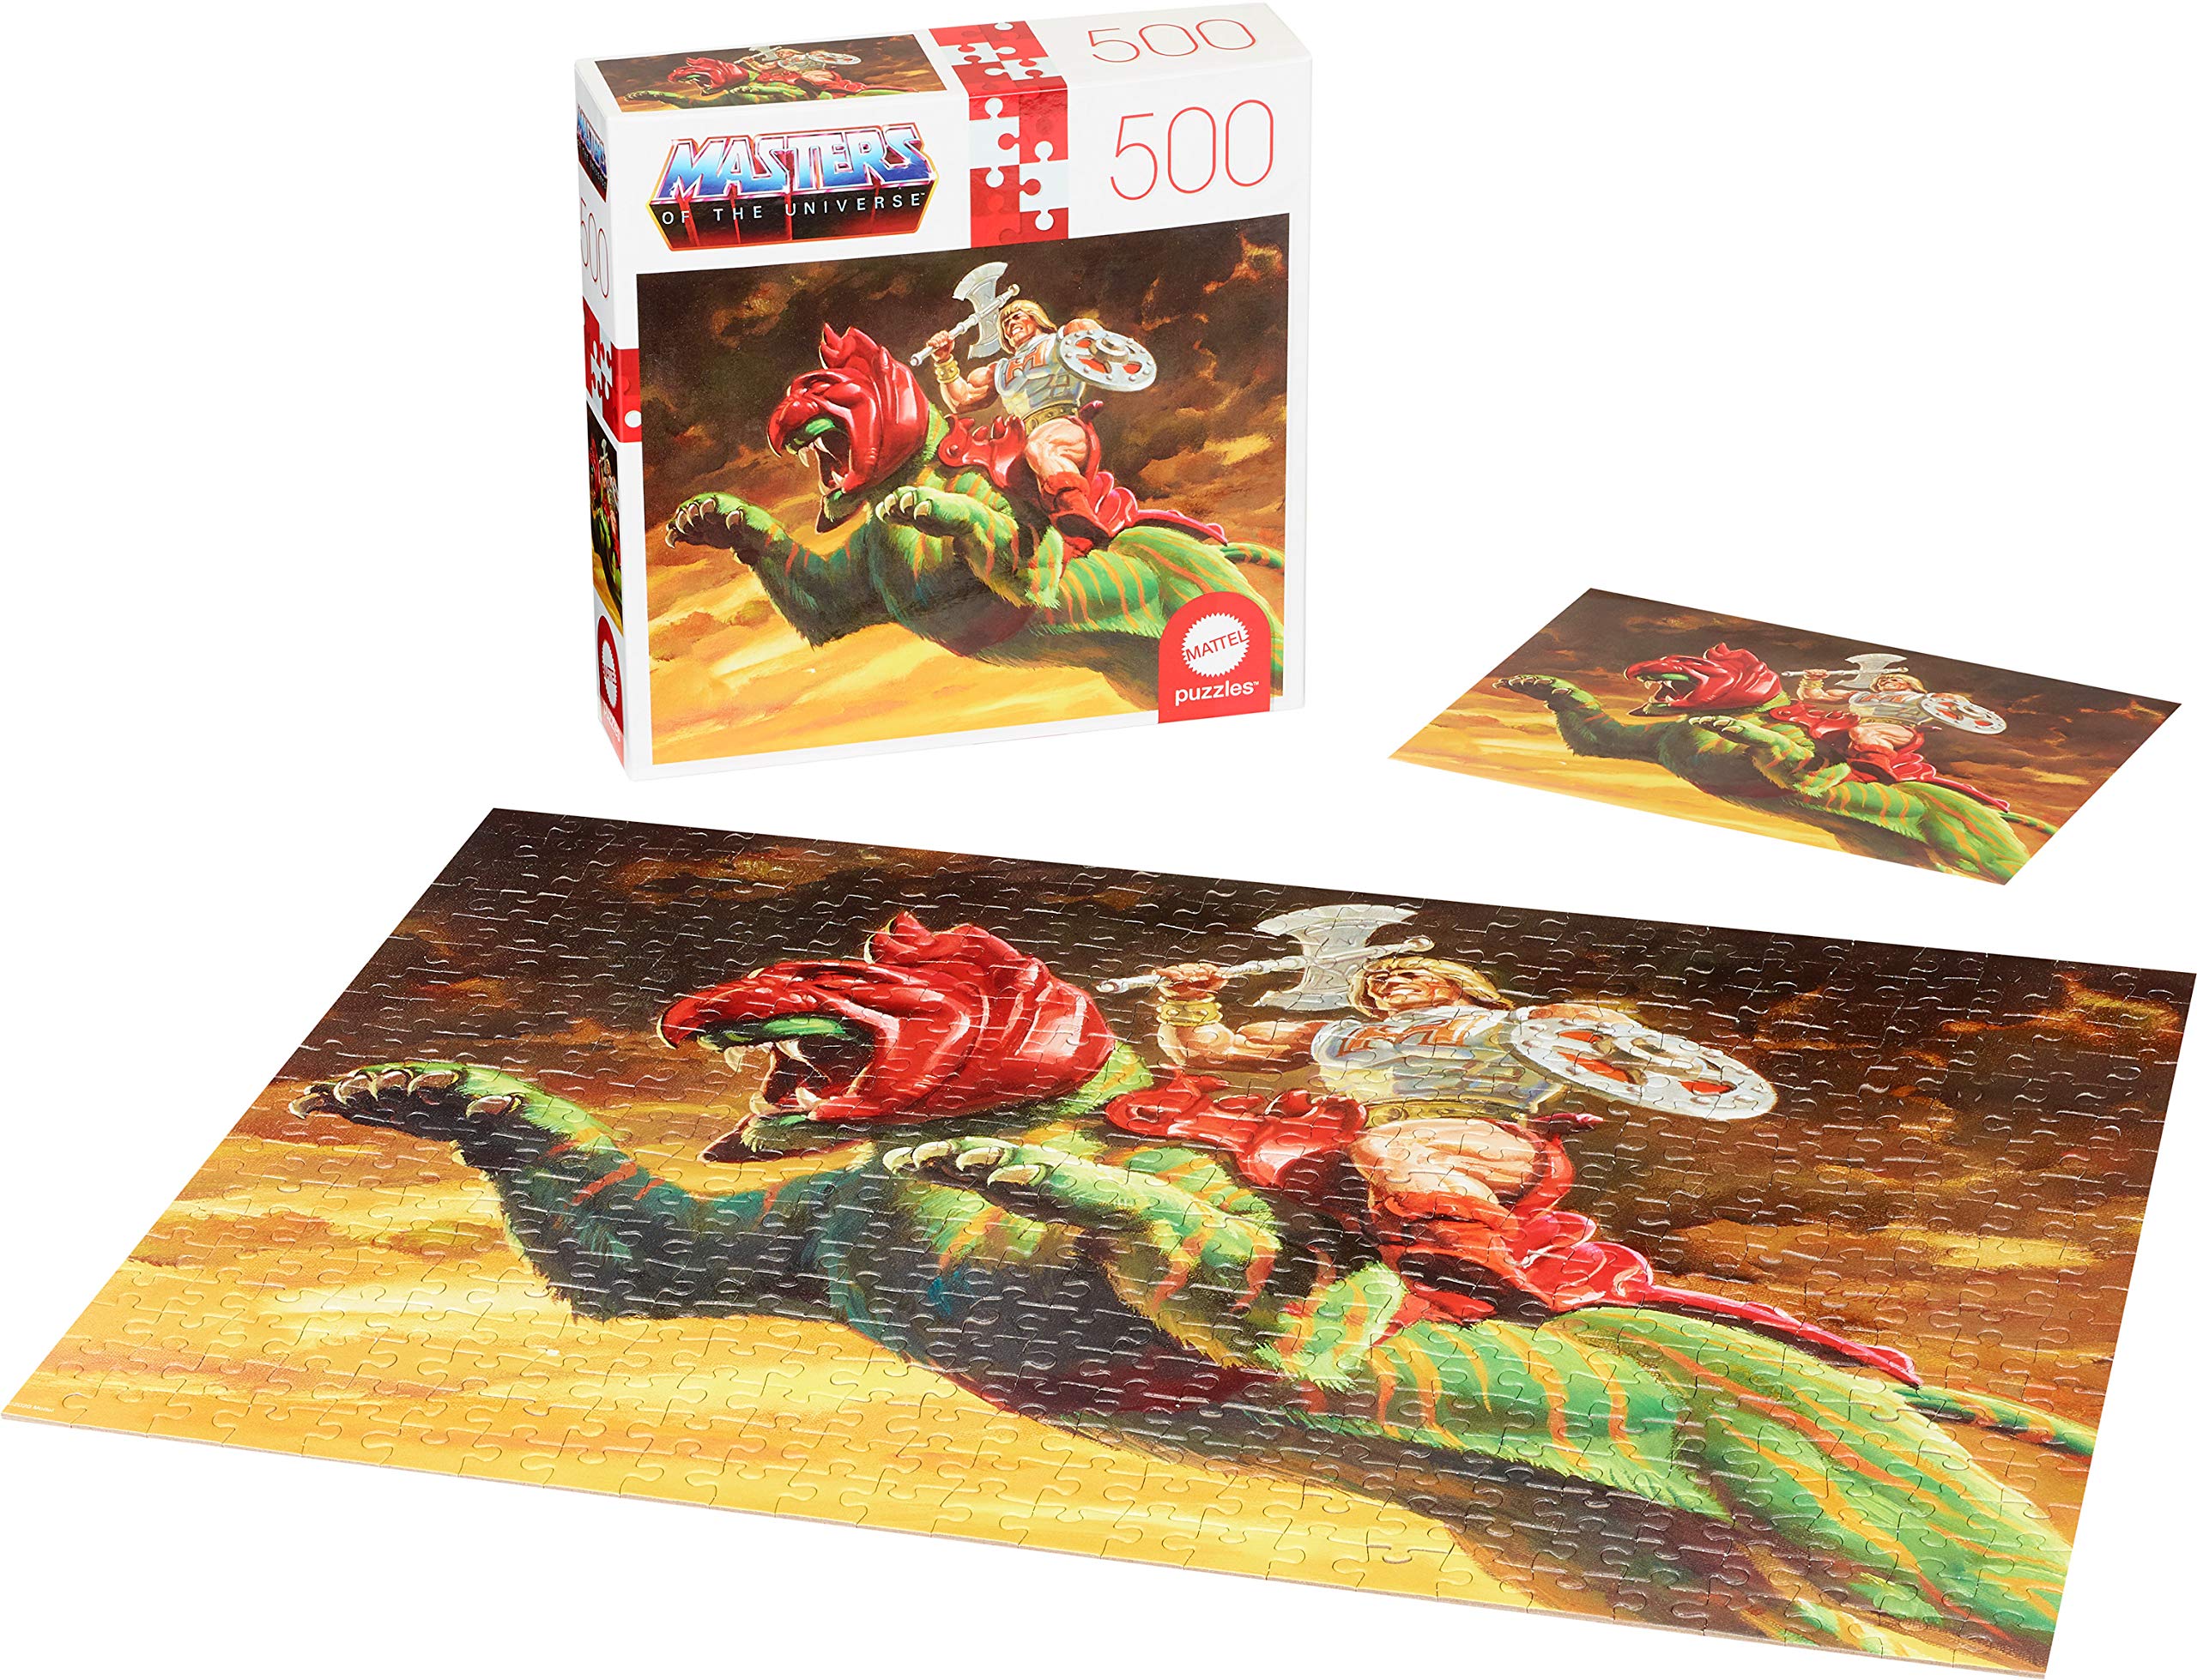 500-Piece Mattel Games Masters of The Universe He-Man & Battle Cat Jigsaw Puzzle w/ Mini-Poster $3.89 + Free Shipping w/ Prime or on $35+